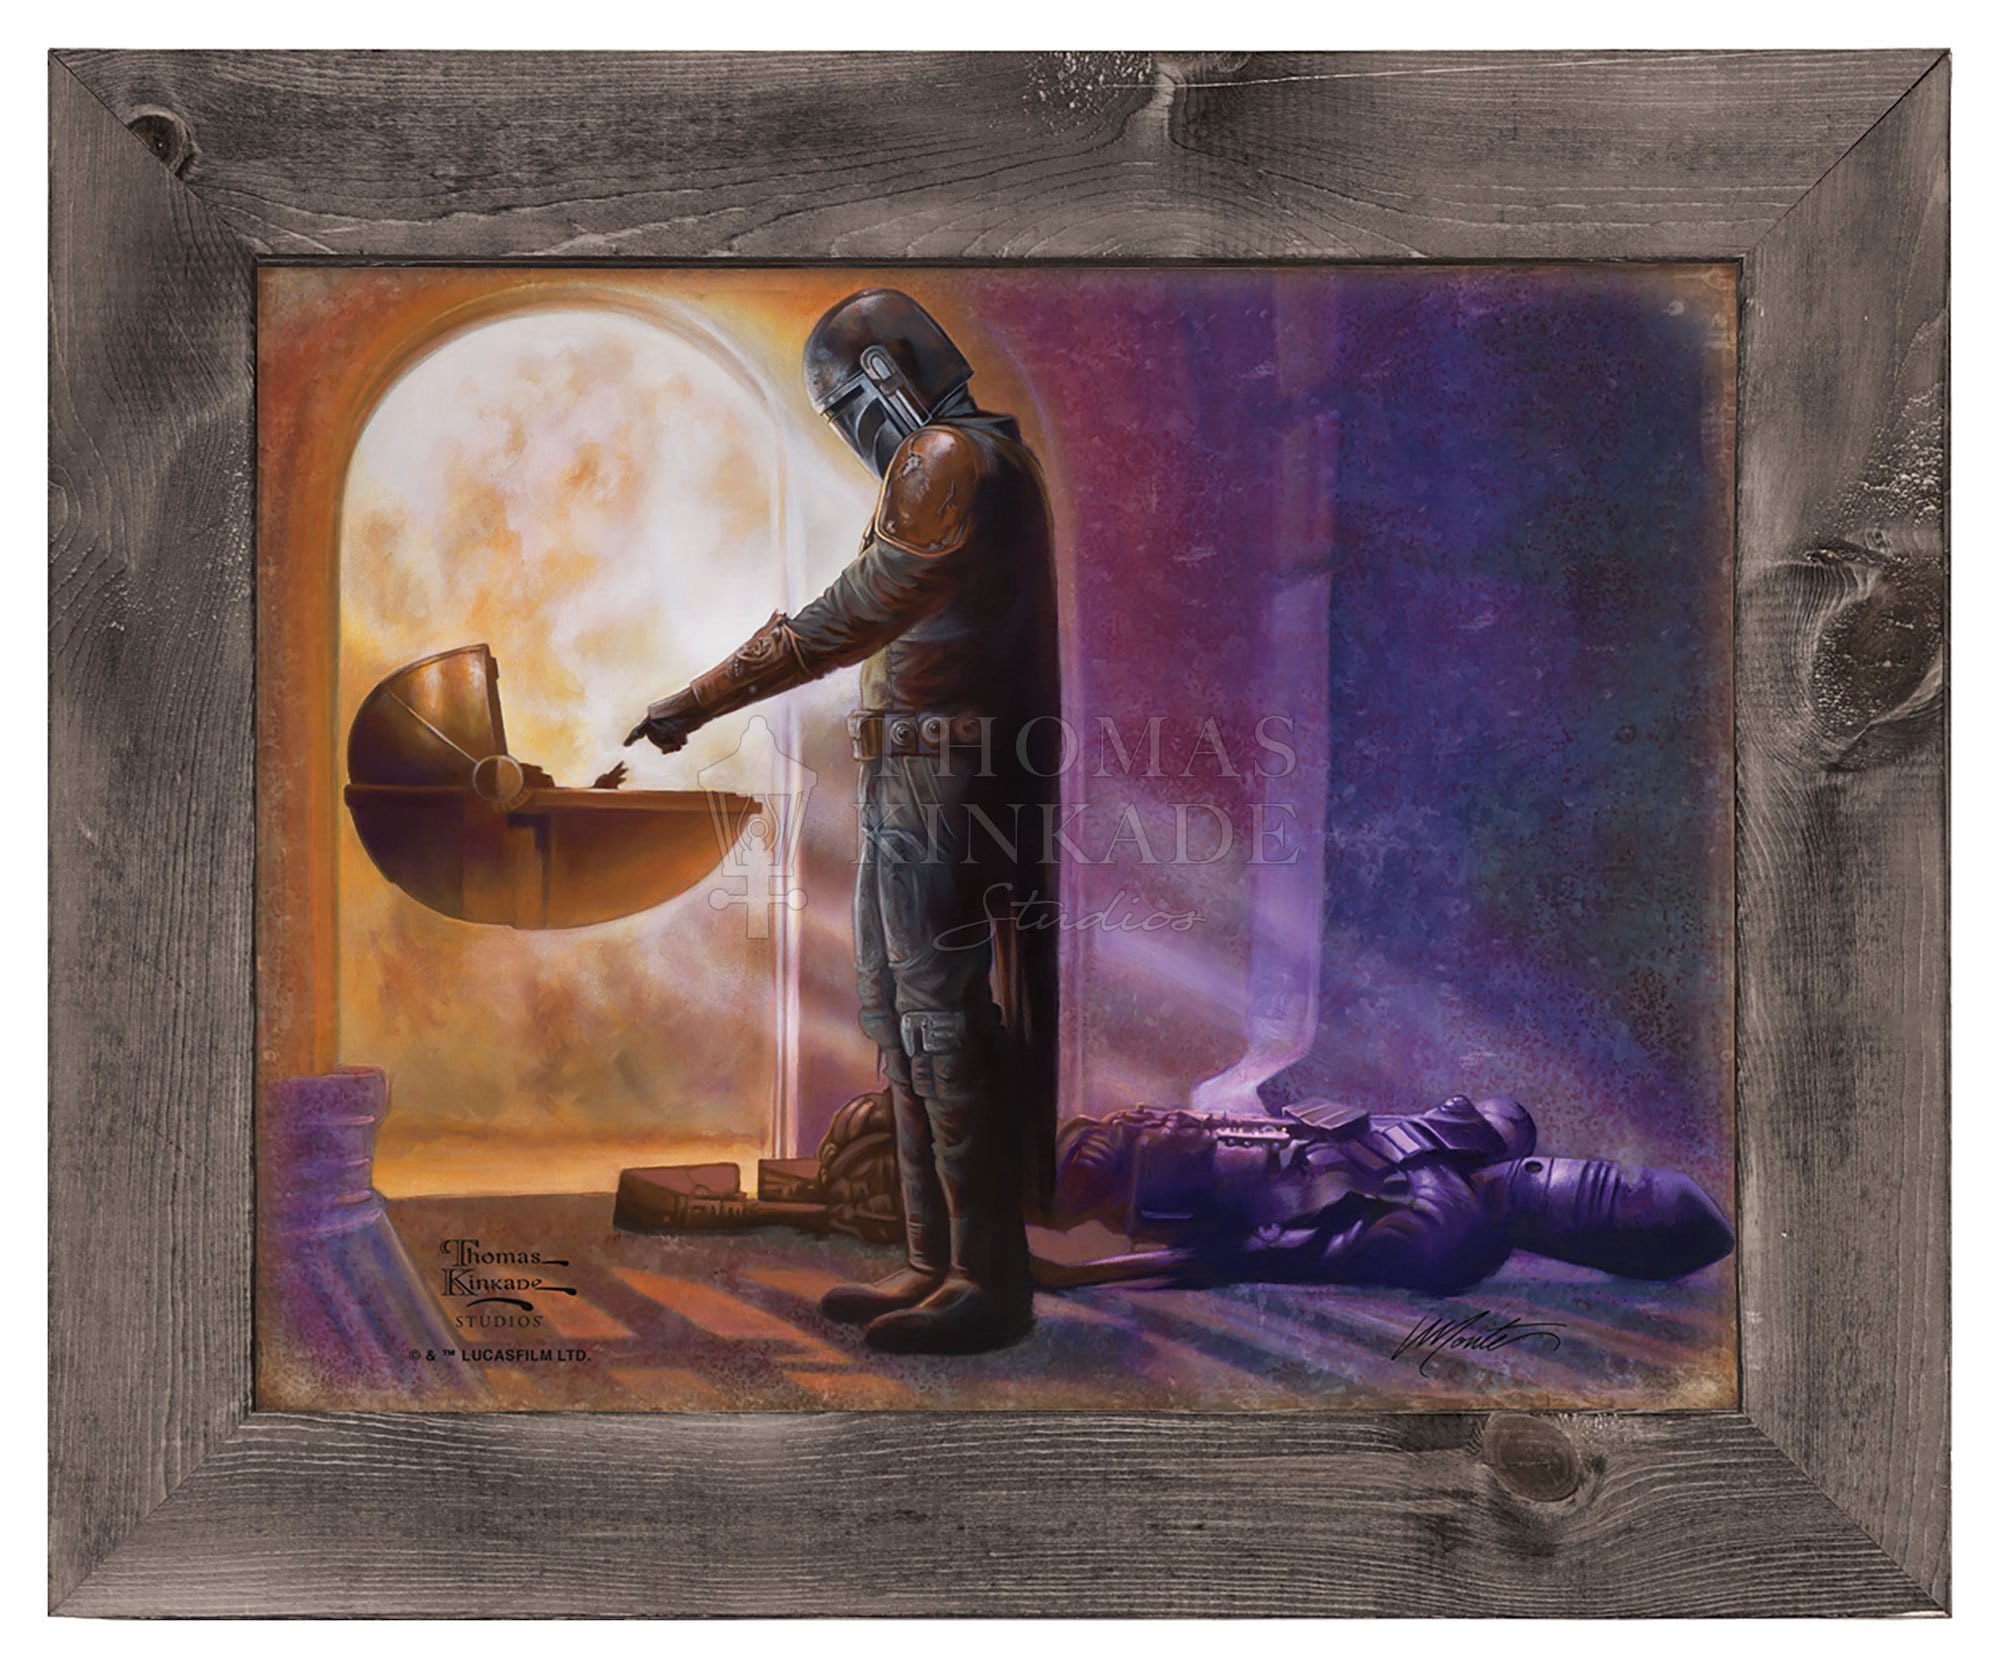 Mandalorian, the hardened bounty hunter finally meets the child and reaches out his hand. - Famed Metal Print